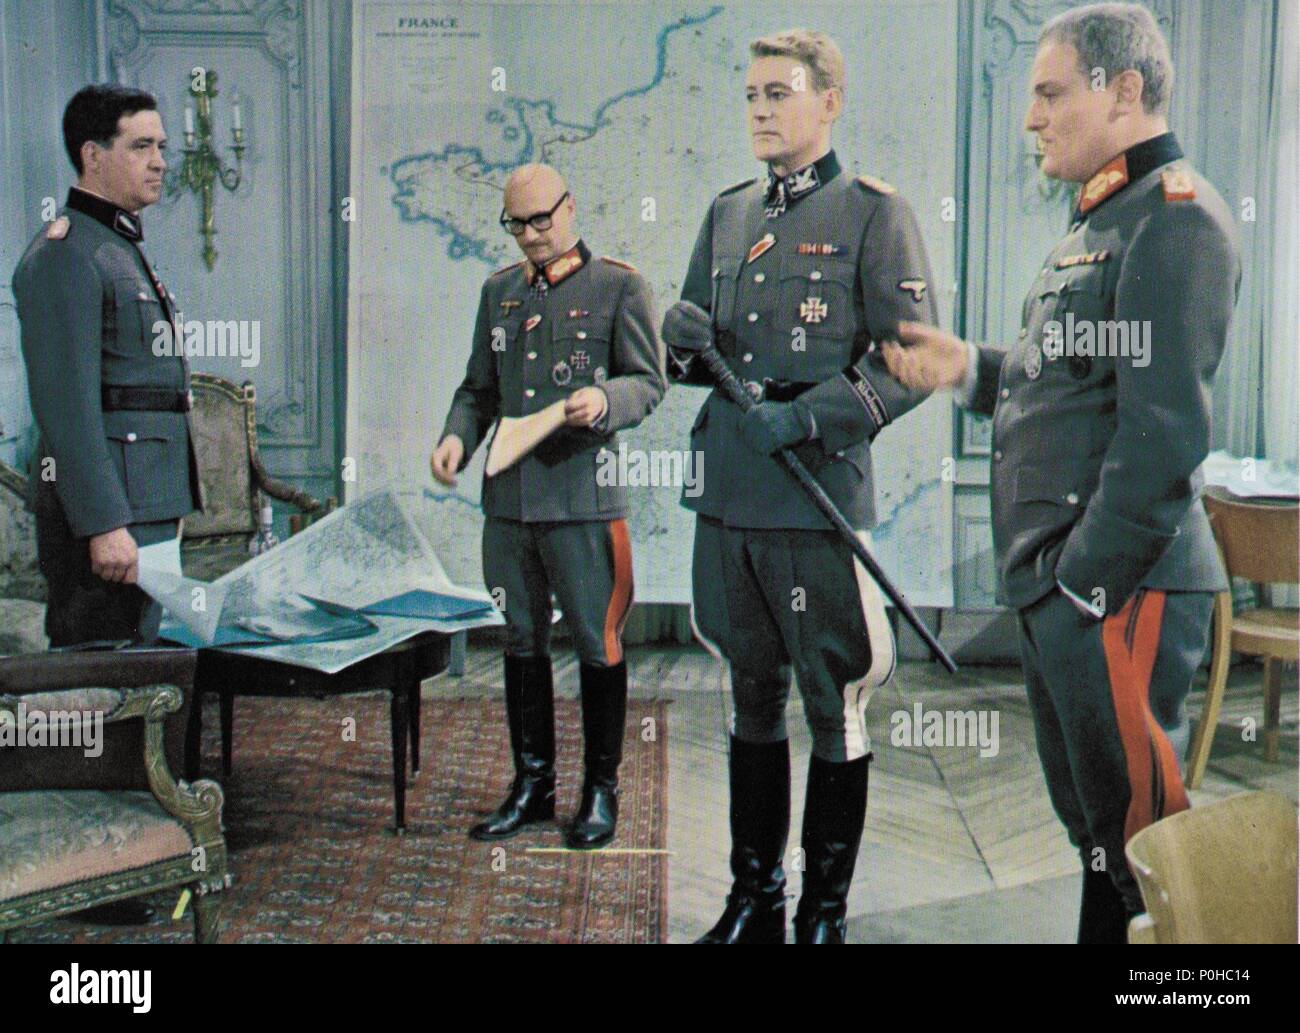 Original Film Title: THE NIGHT OF THE GENERALS.  English Title: THE NIGHT OF THE GENERALS.  Film Director: ANATOLE LITVAK.  Year: 1967.  Stars: CHARLES GRAY; DONALD PLEASENCE; PETER O'TOOLE. Credit: COLUMBIA PICTURES / Album Stock Photo